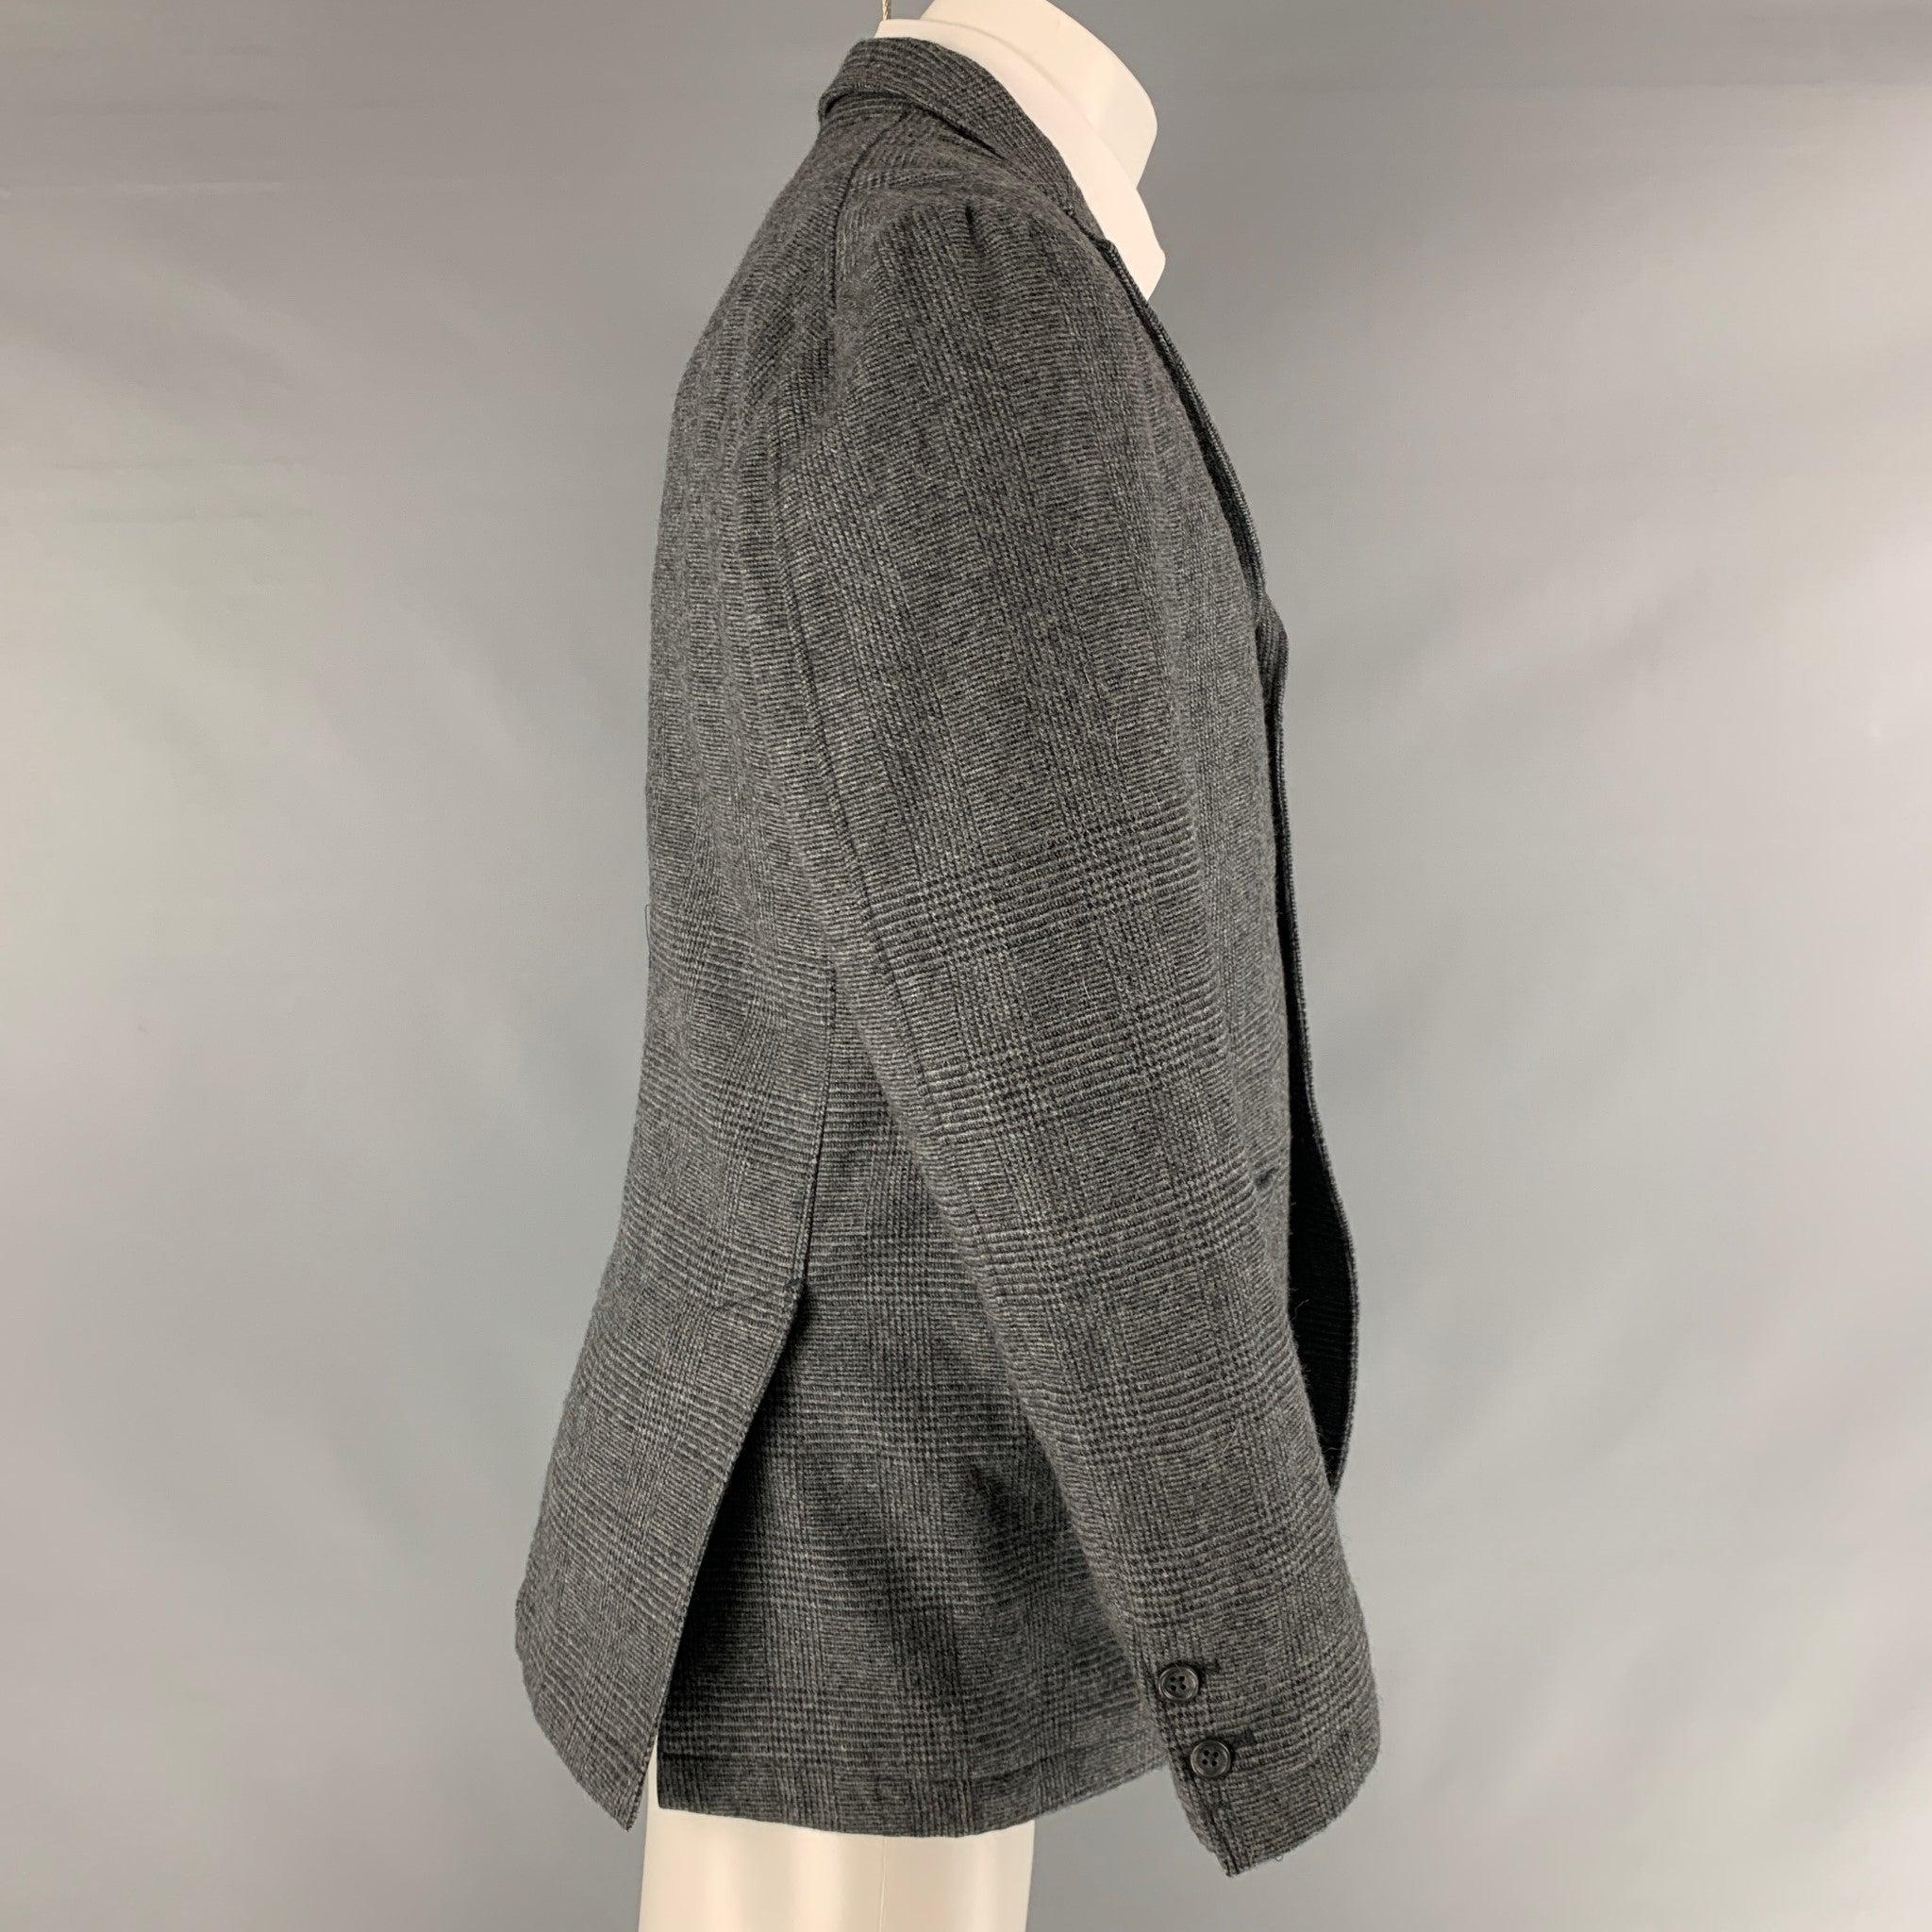 ENGINEERED GARMENTS sport coat comes in a black and grey glenplaid wool woven material featuring a notch lapel, flap pockets, double back vent, and a double button closure. Made in USA.Excellent Pre- Owned Material. 

Marked:   S 

Measurements: 
